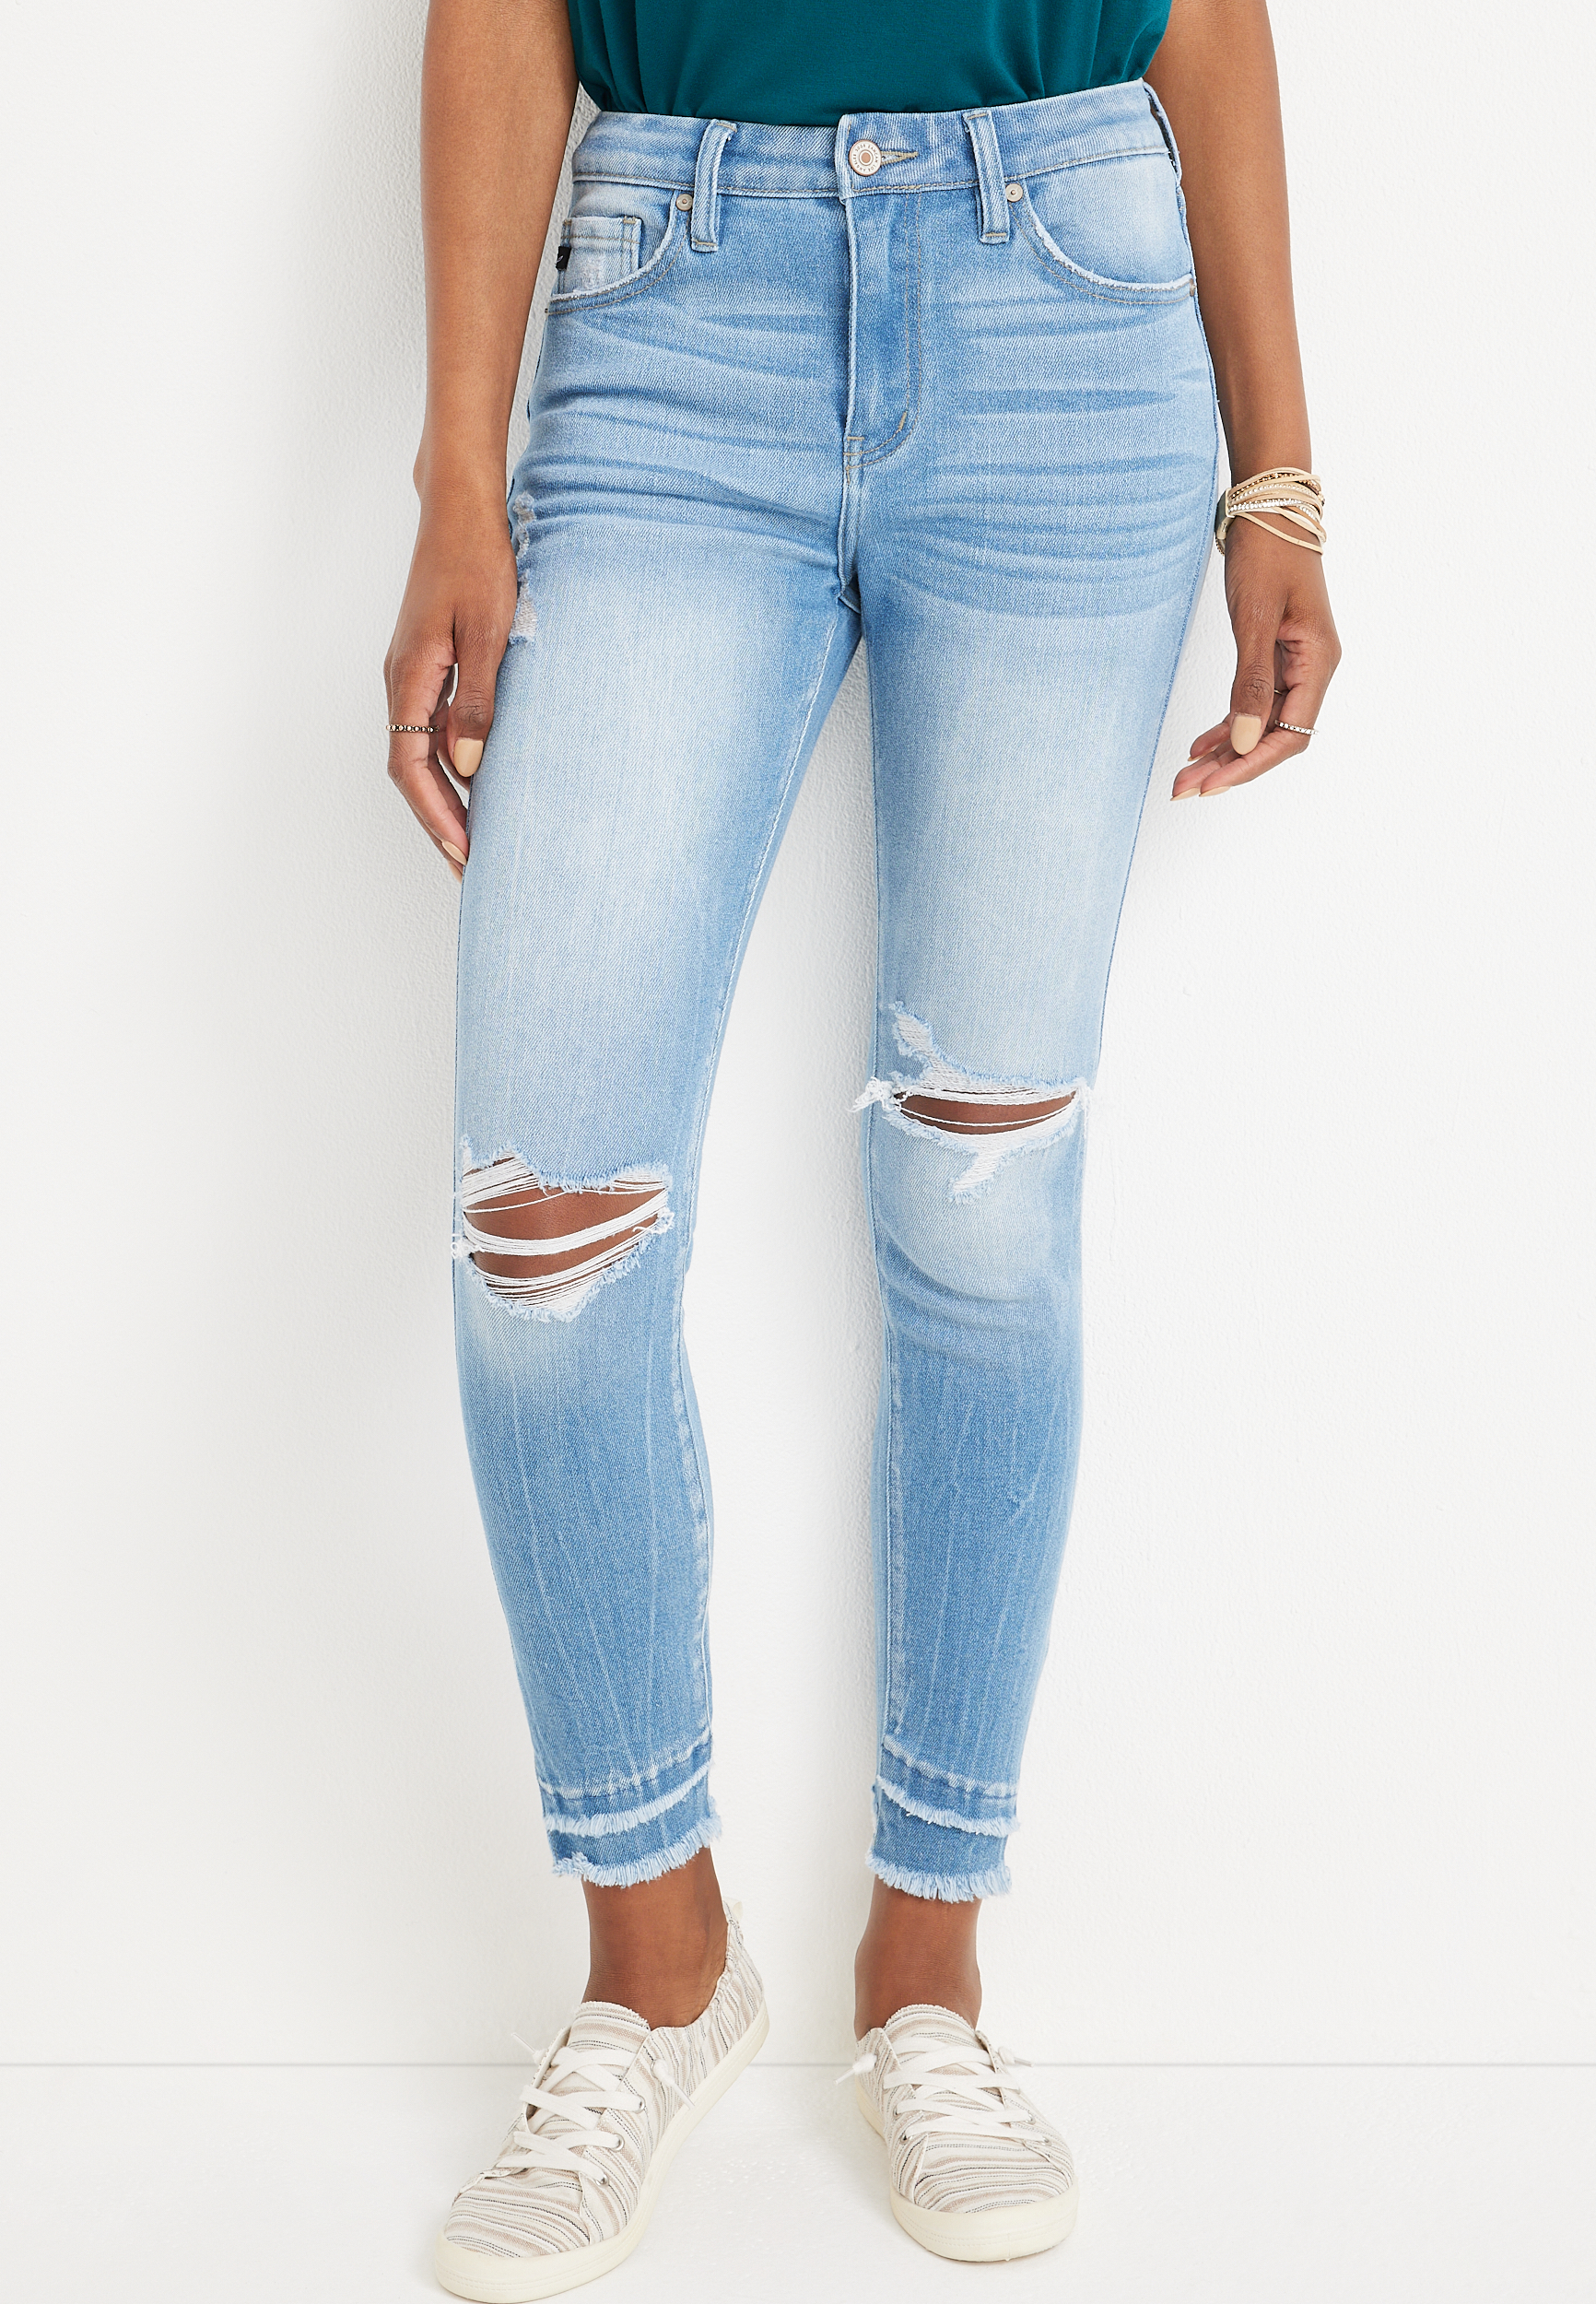 KanCan™ Skinny High Rise Double Frayed Hem Jean | maurices